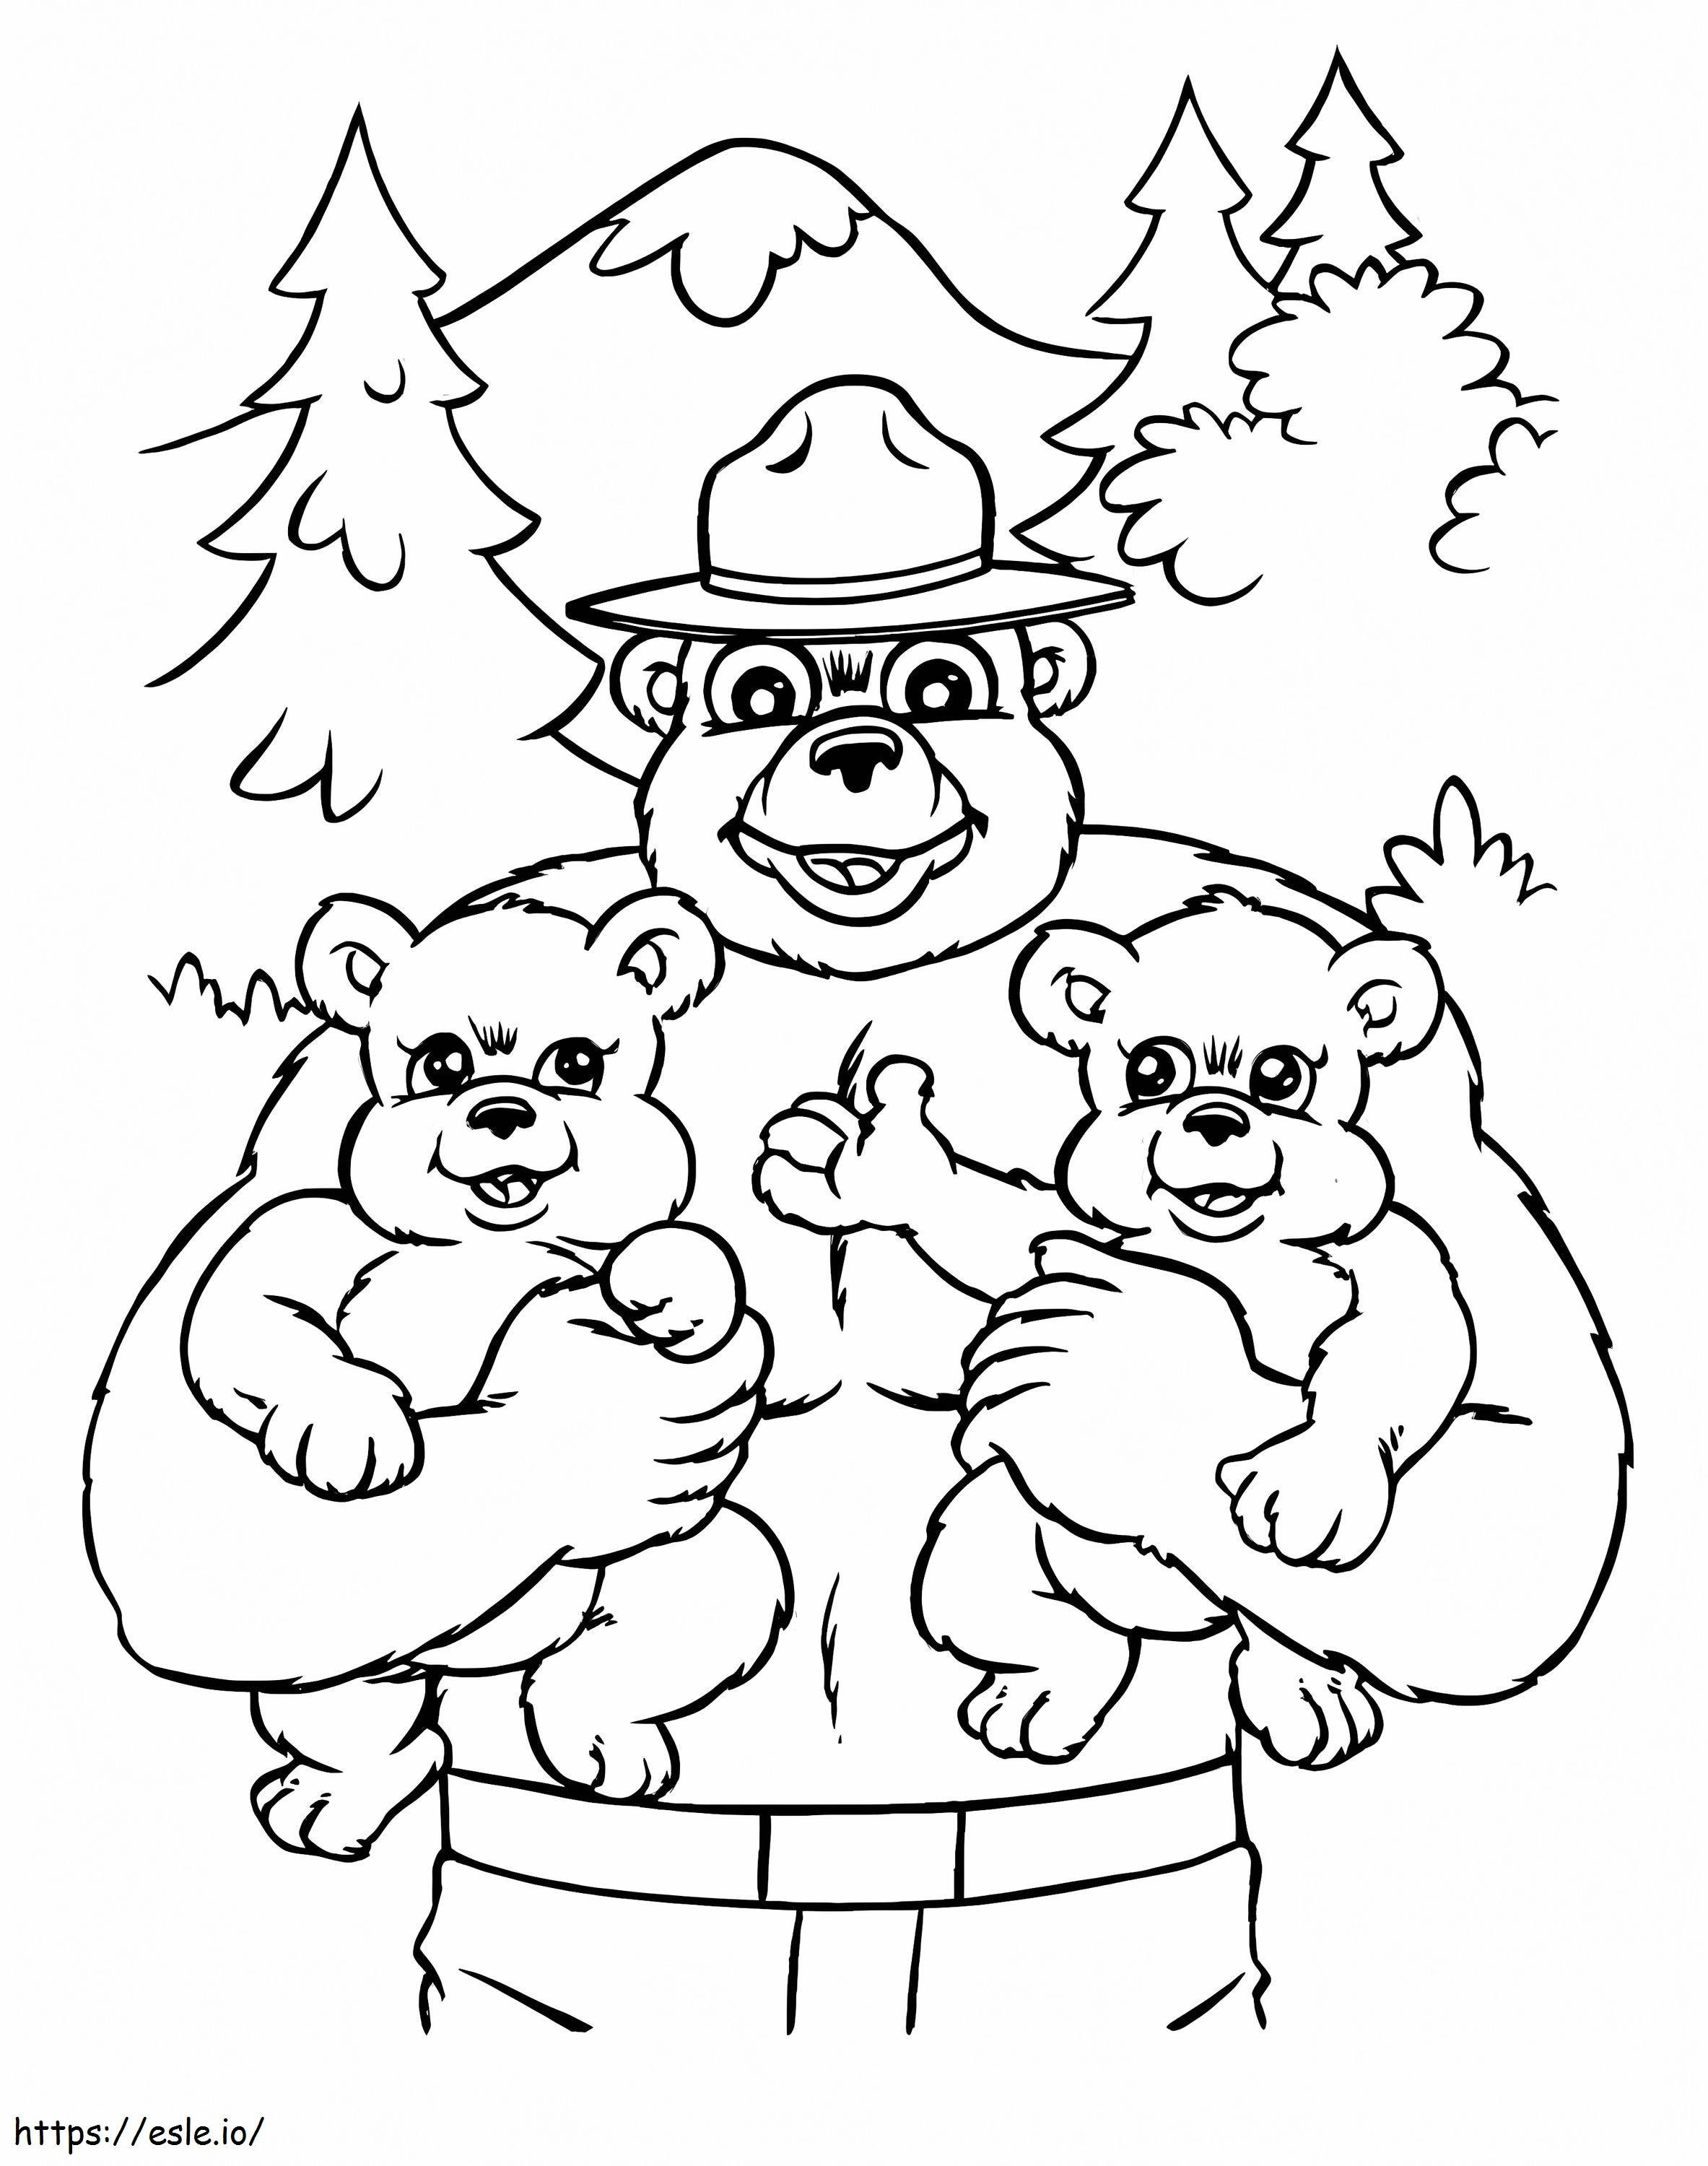 Smoky Bear And Two Little Bears coloring page